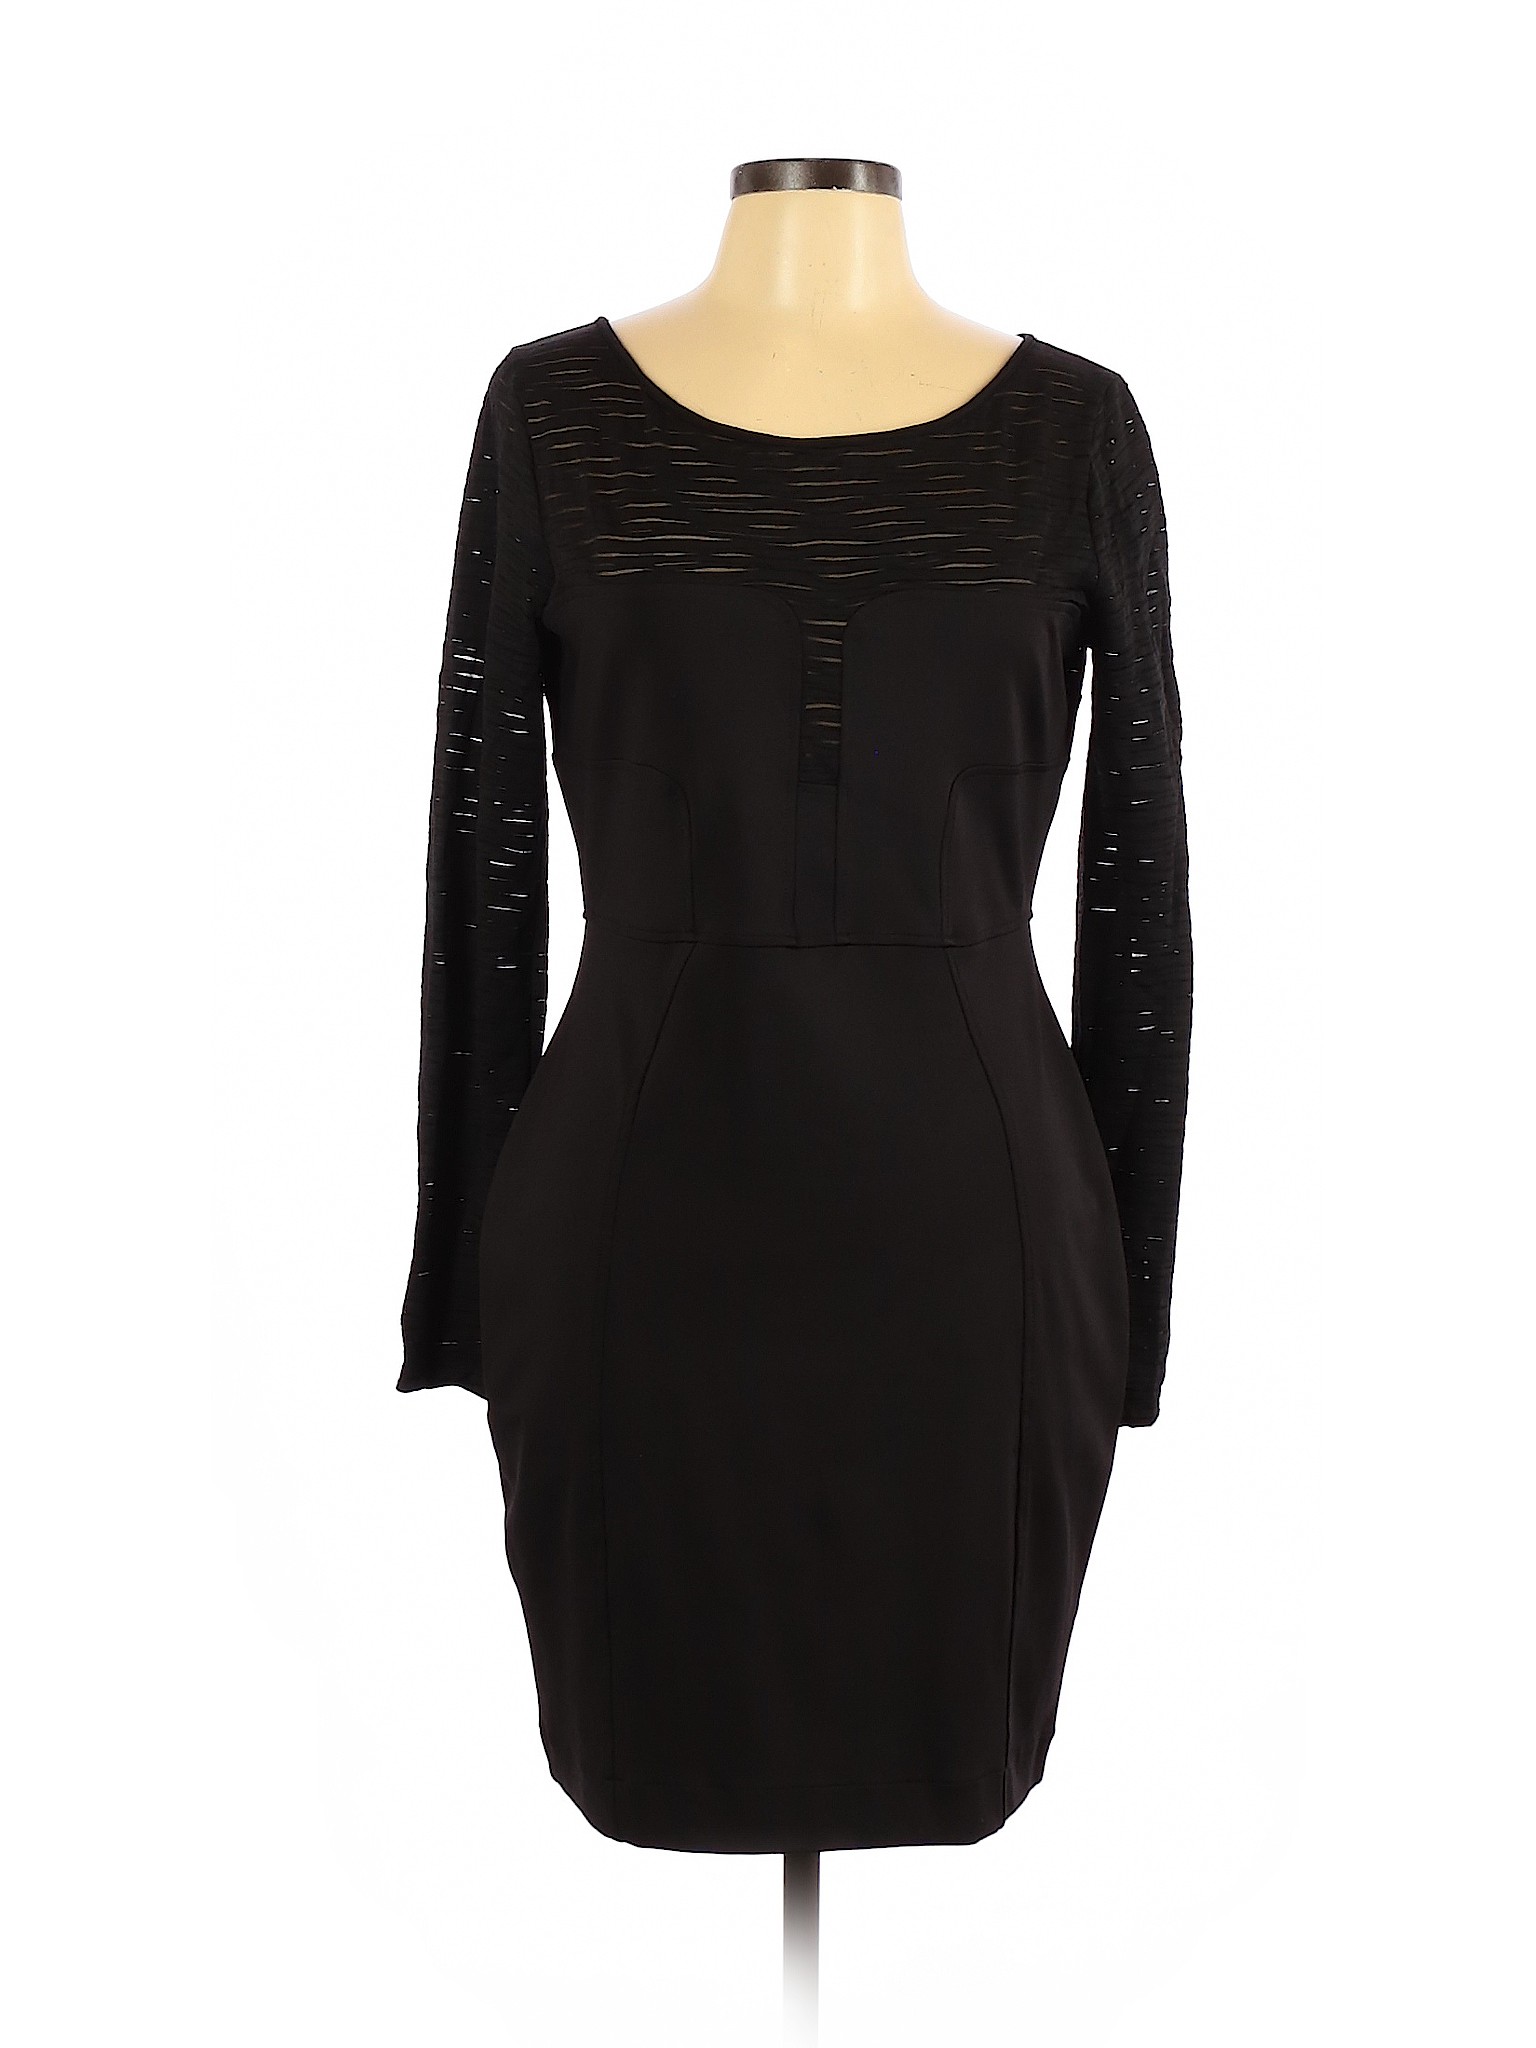 French Connection Women Black Cocktail Dress 12 | eBay